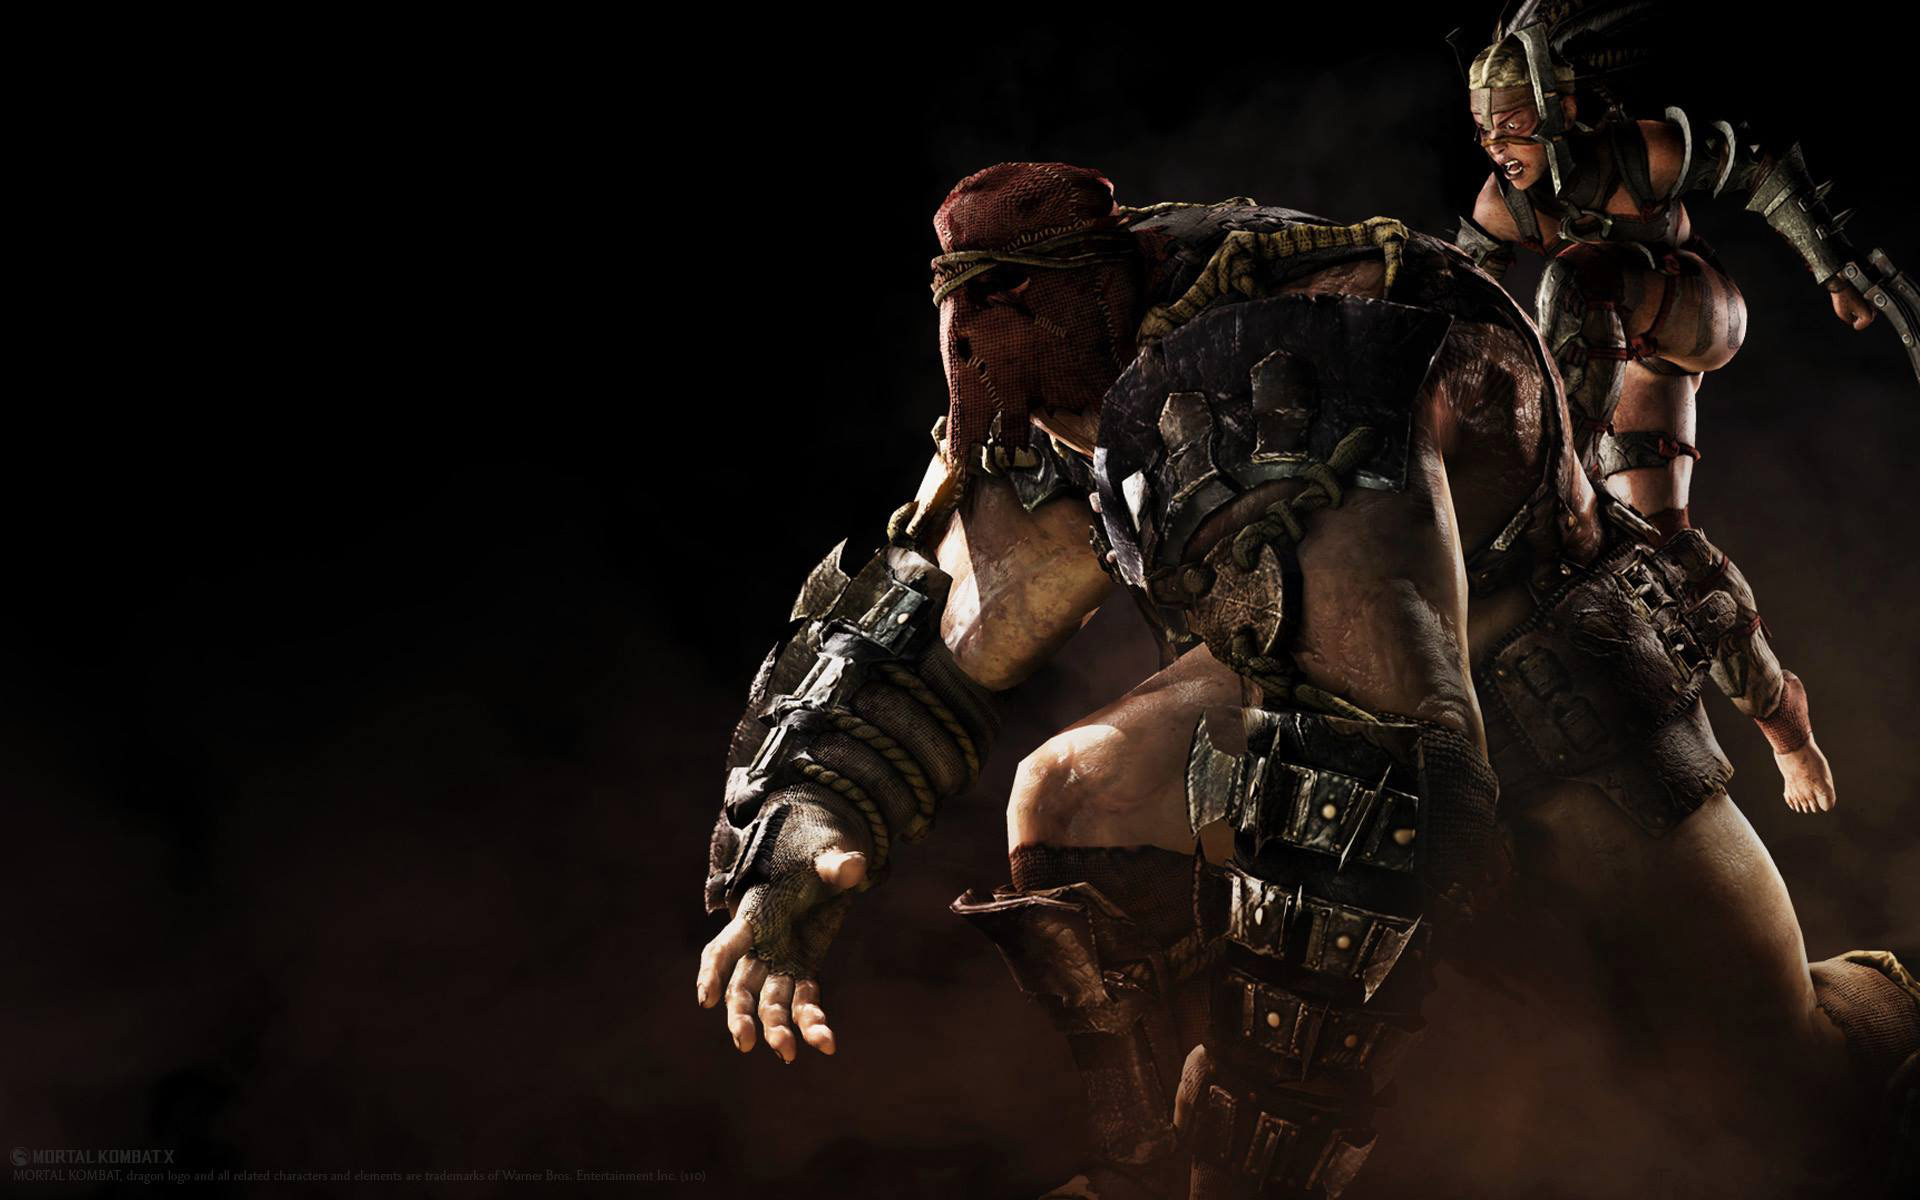 By Stephen Ments Off On Mortal Kombat X Characters Wallpaper